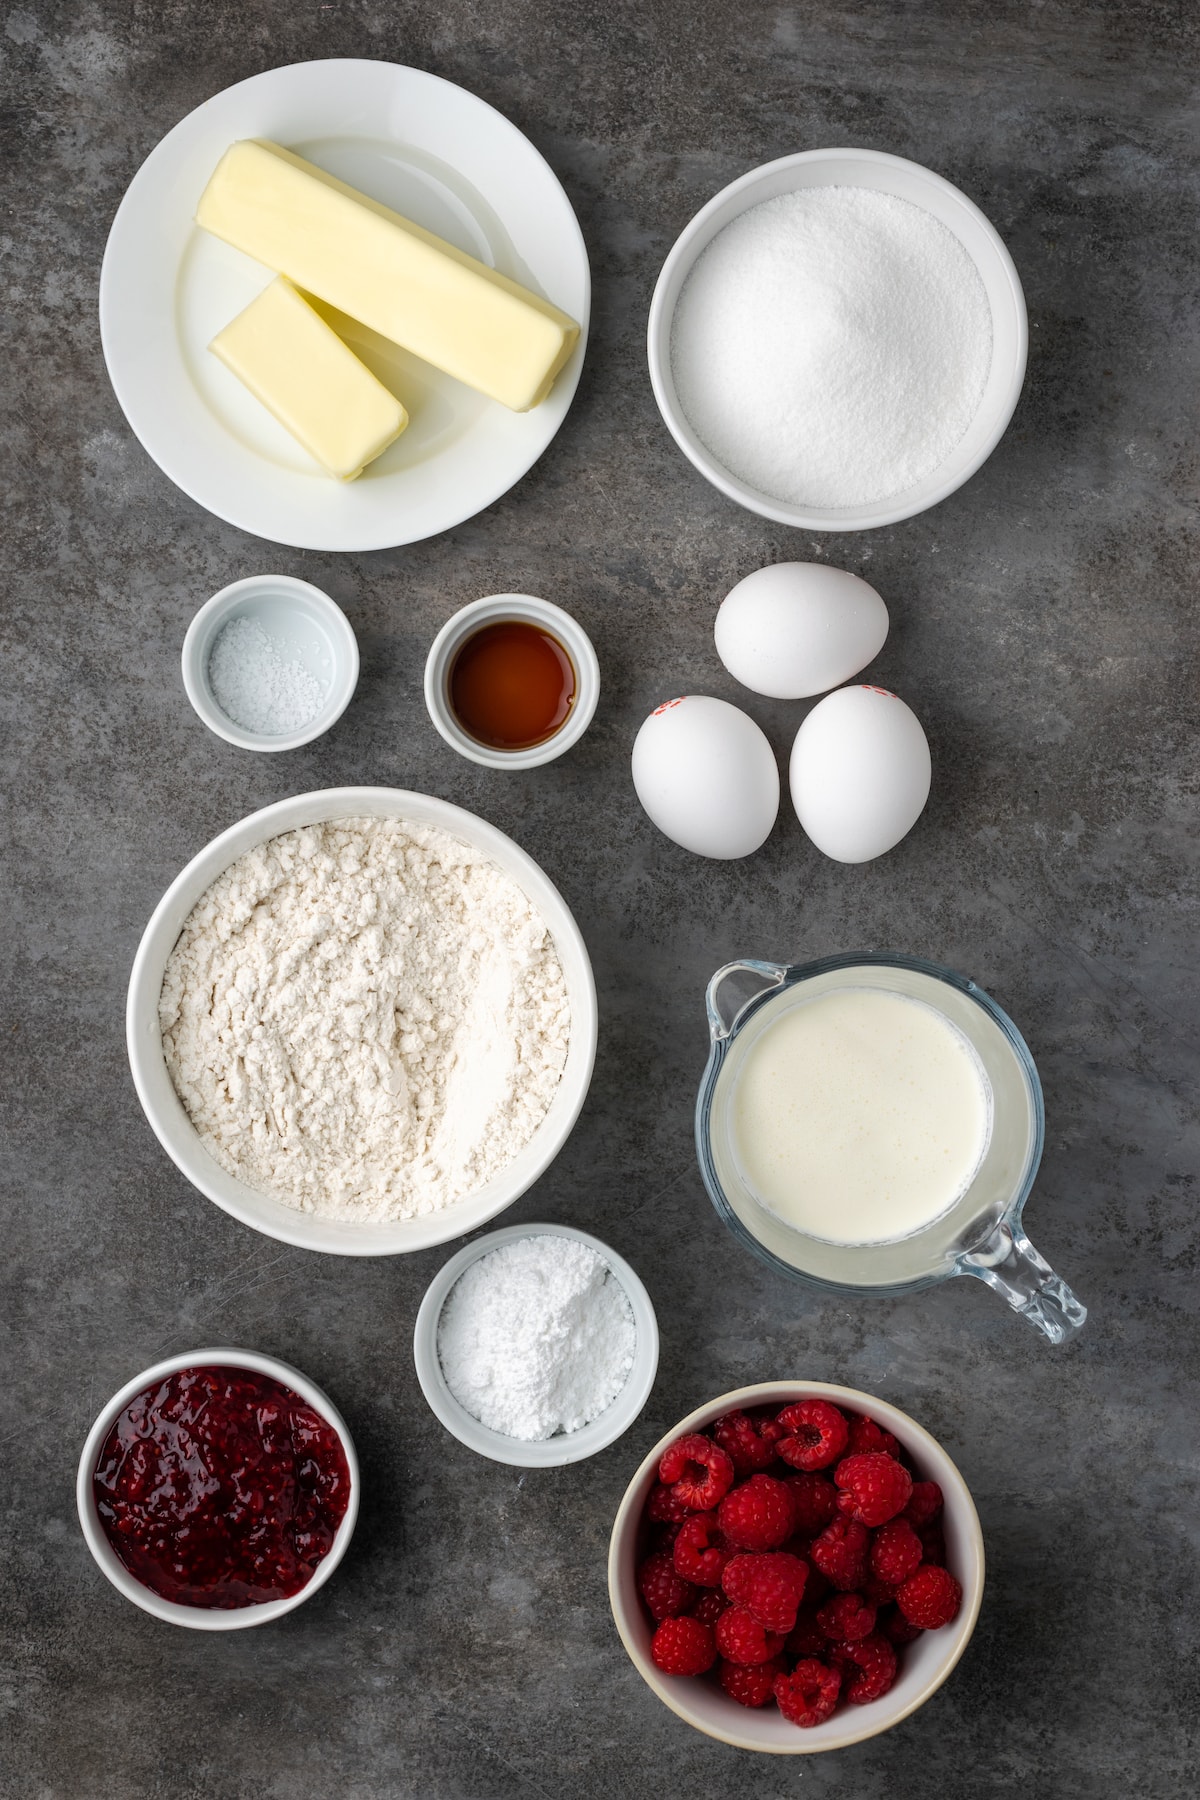 The ingredients for a homemade Victoria sponge cake.